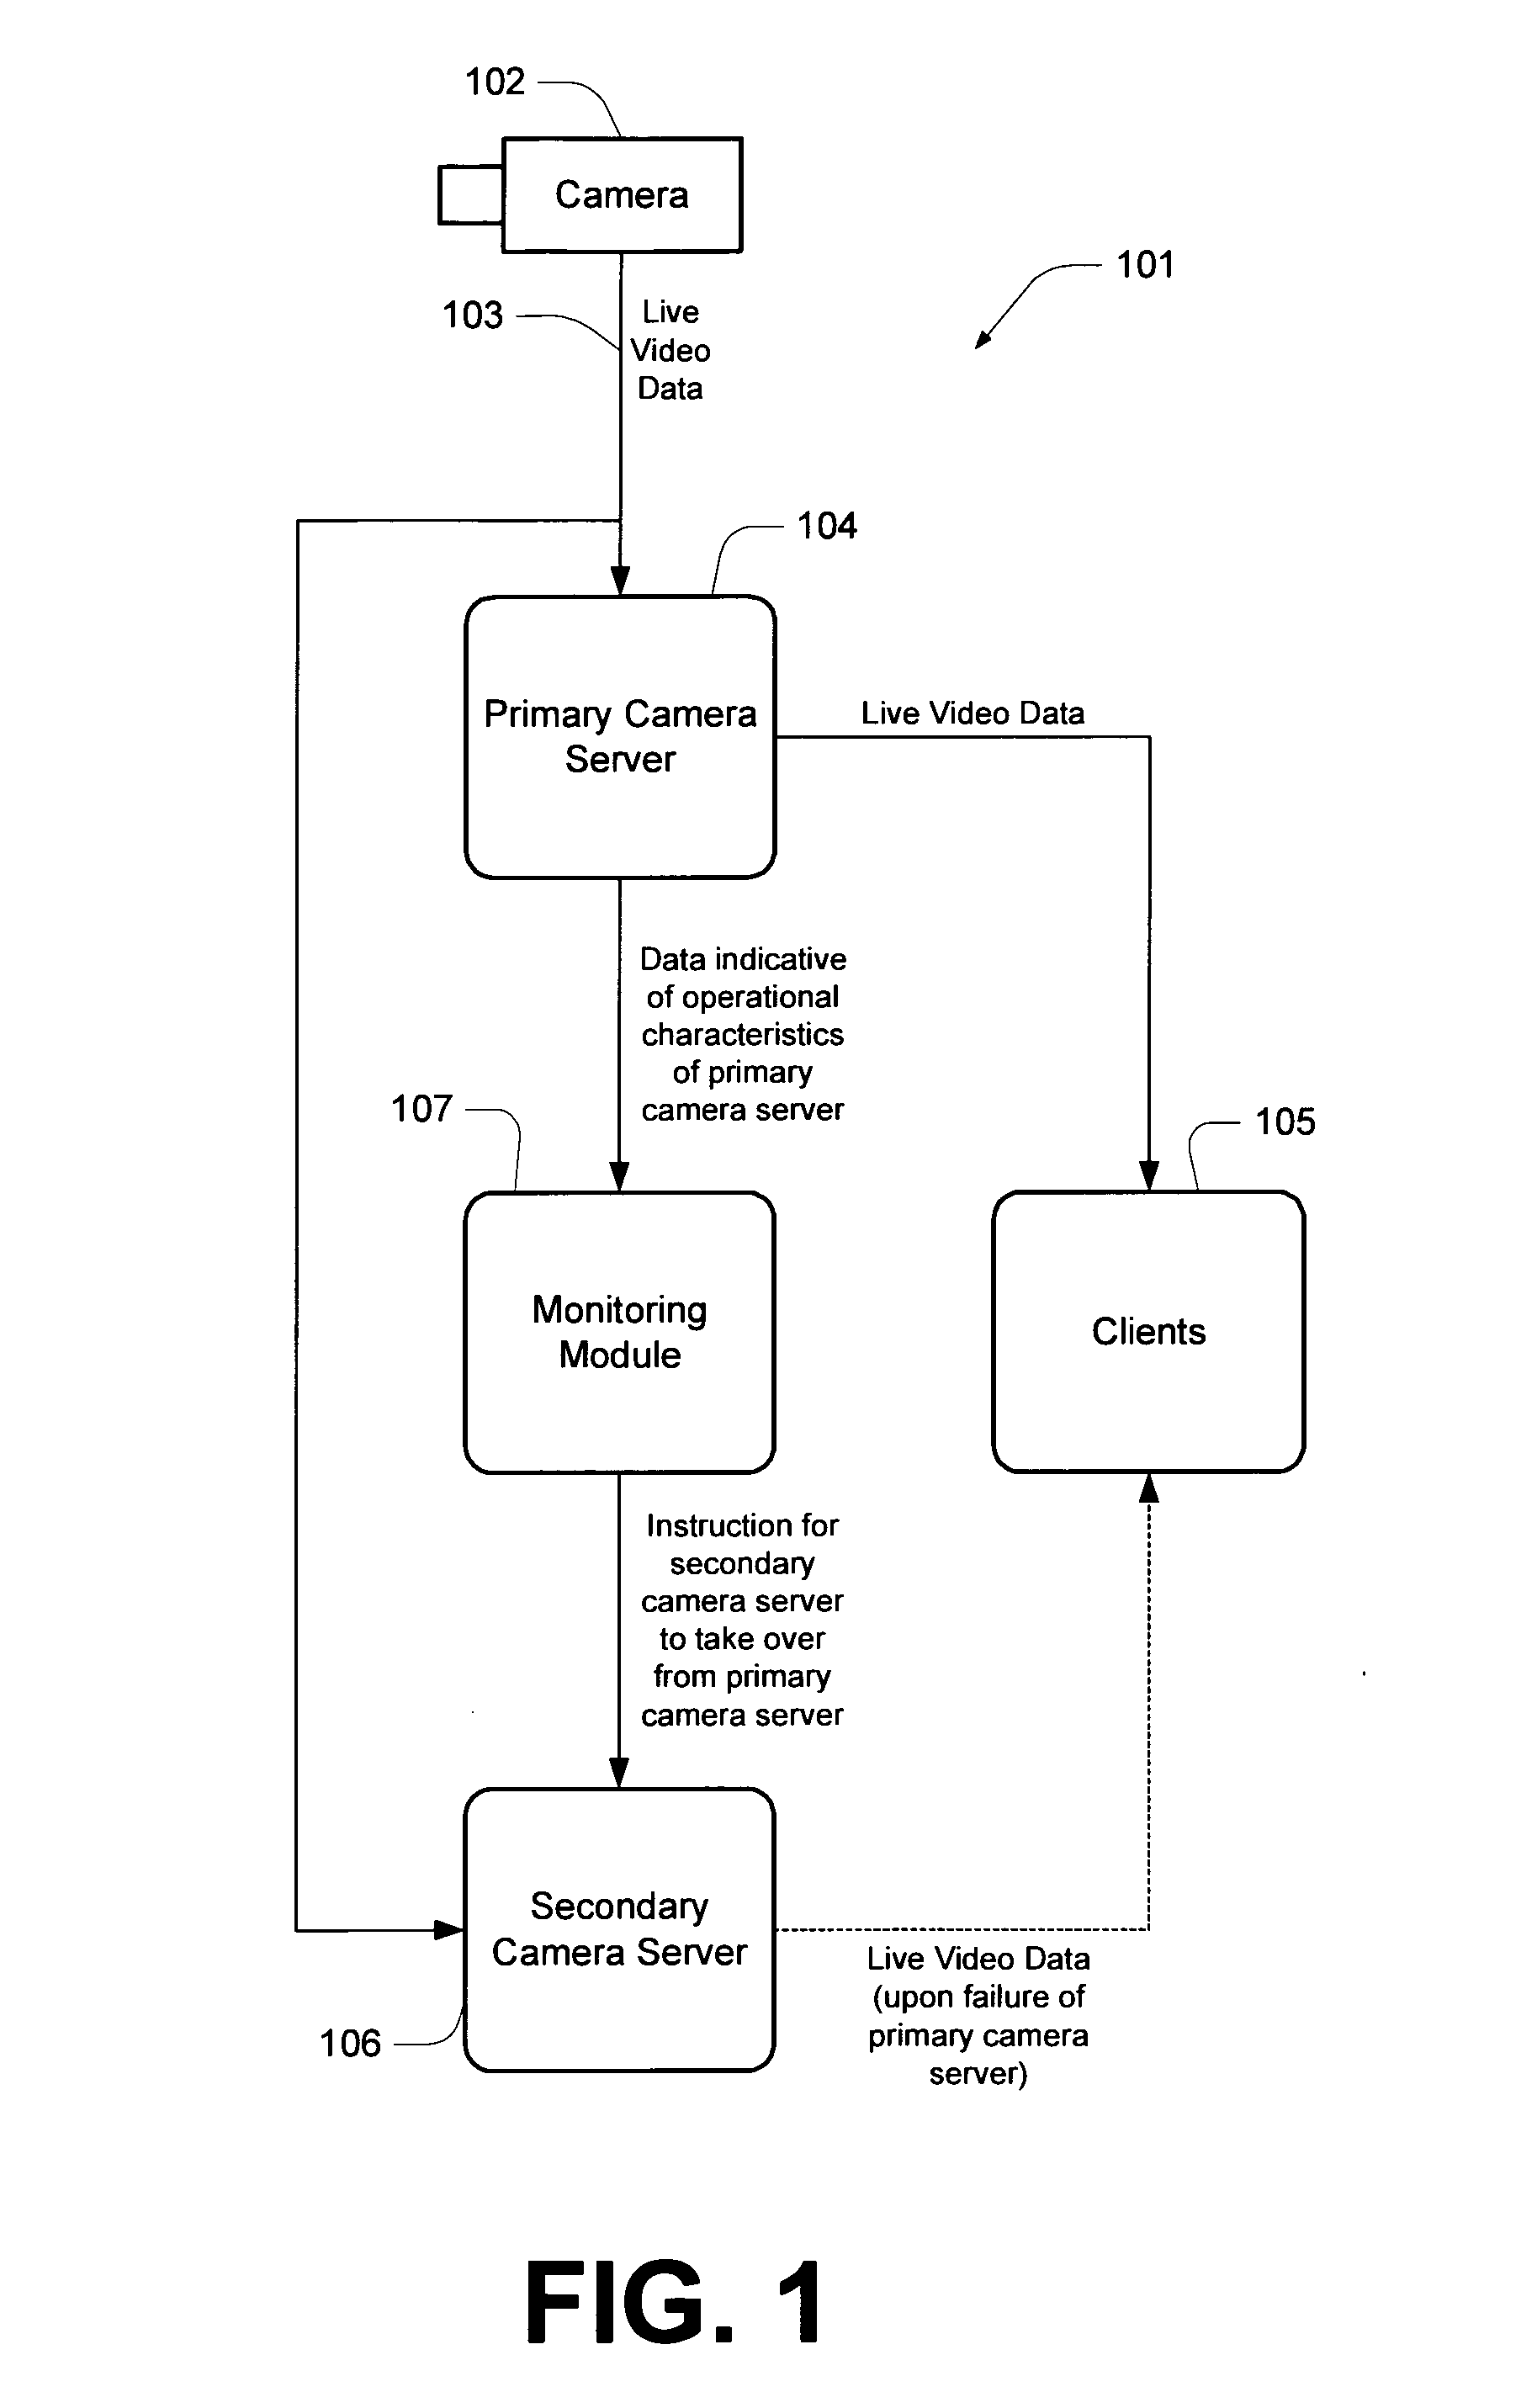 Systems and methods for managing live video data